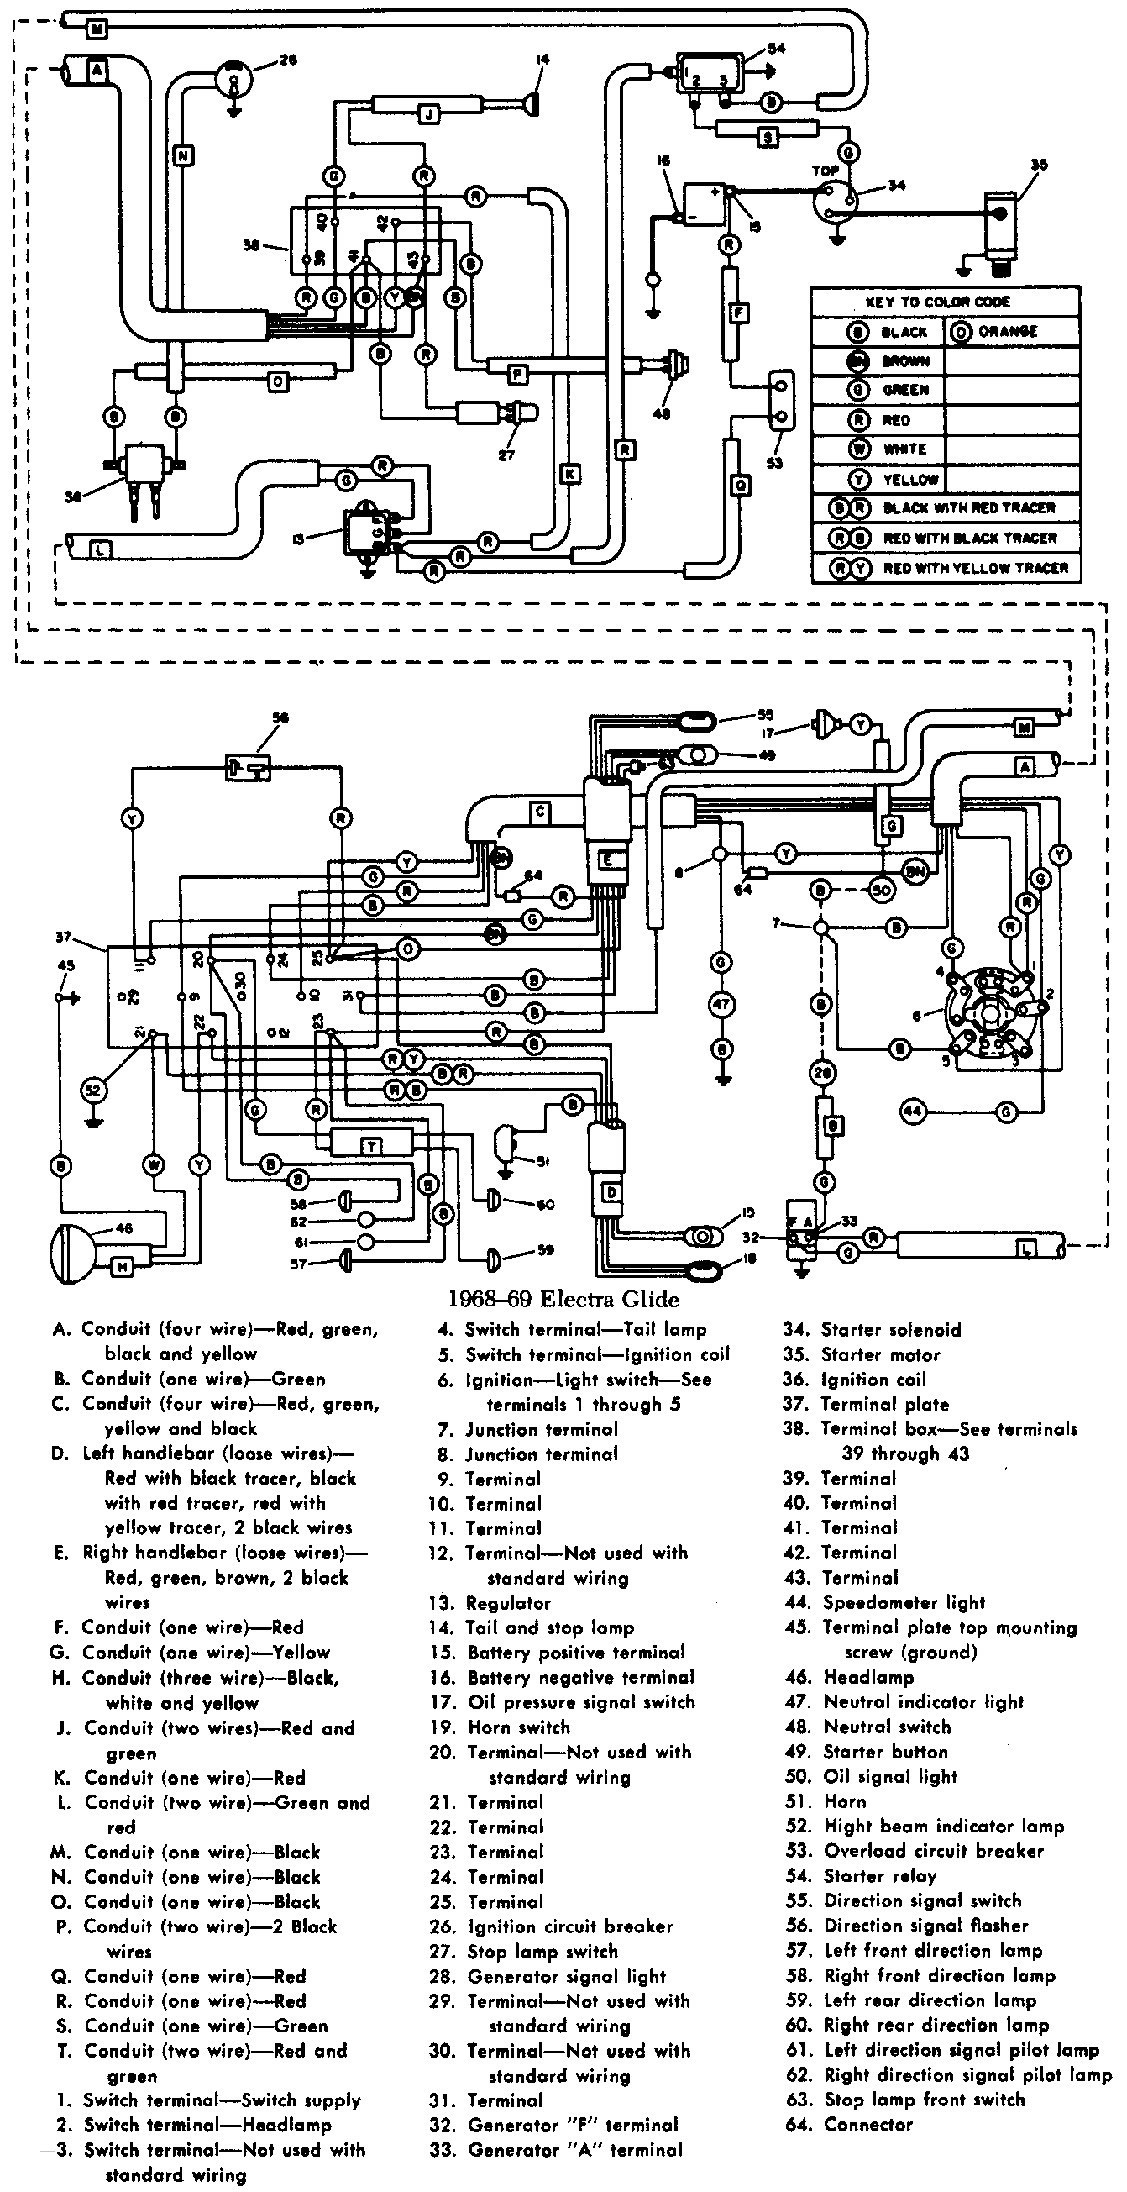 Harley Davidson Radio Wiring Harness Diagram Electrical Circuit Harley Ignition Switch Wiring Diagram Collection